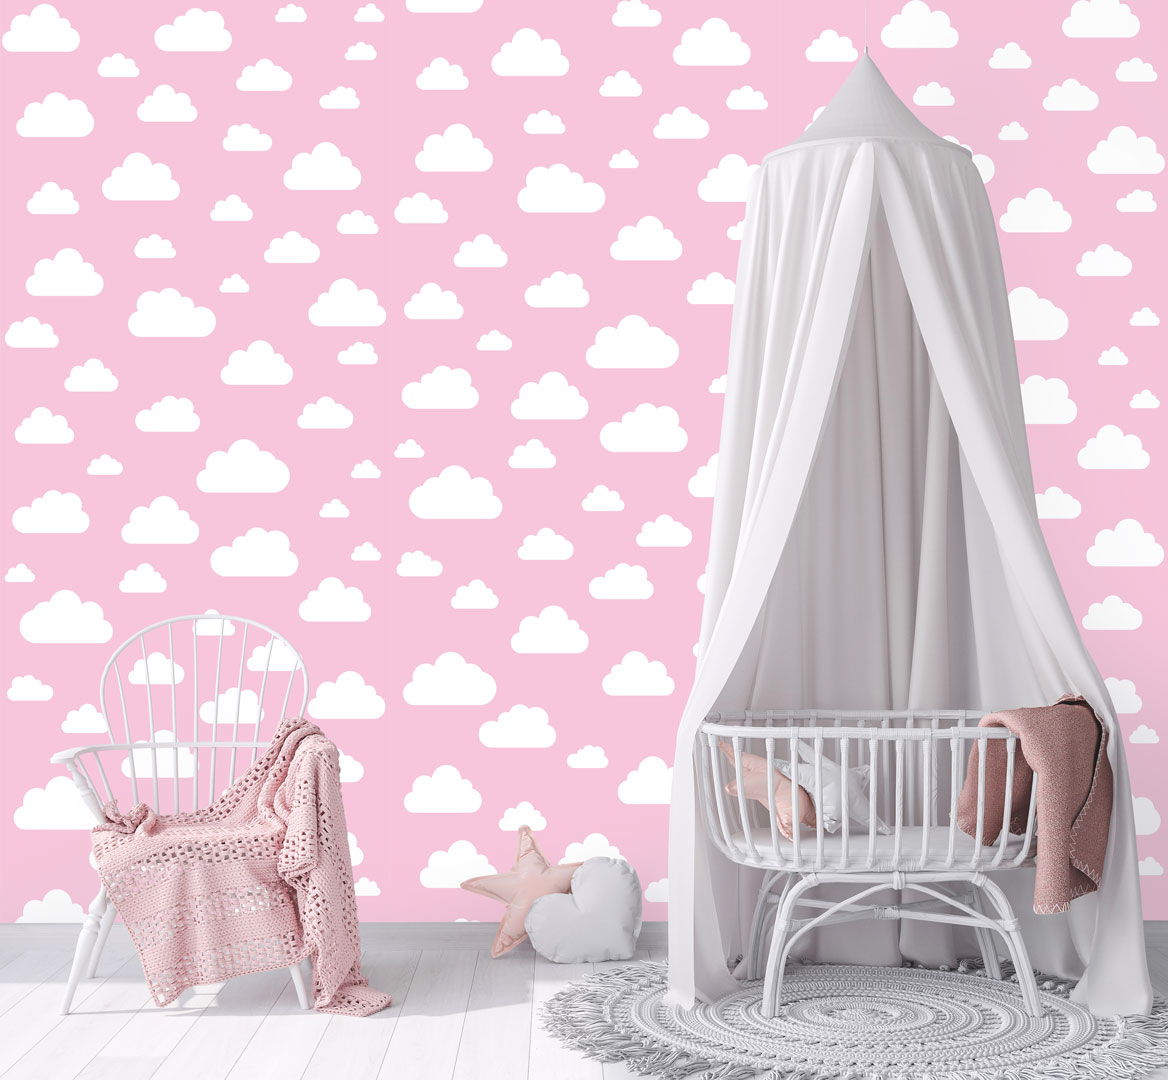 Pink wallpaper for walls with white 7,5-24 cm clouds - Dekoori image 2